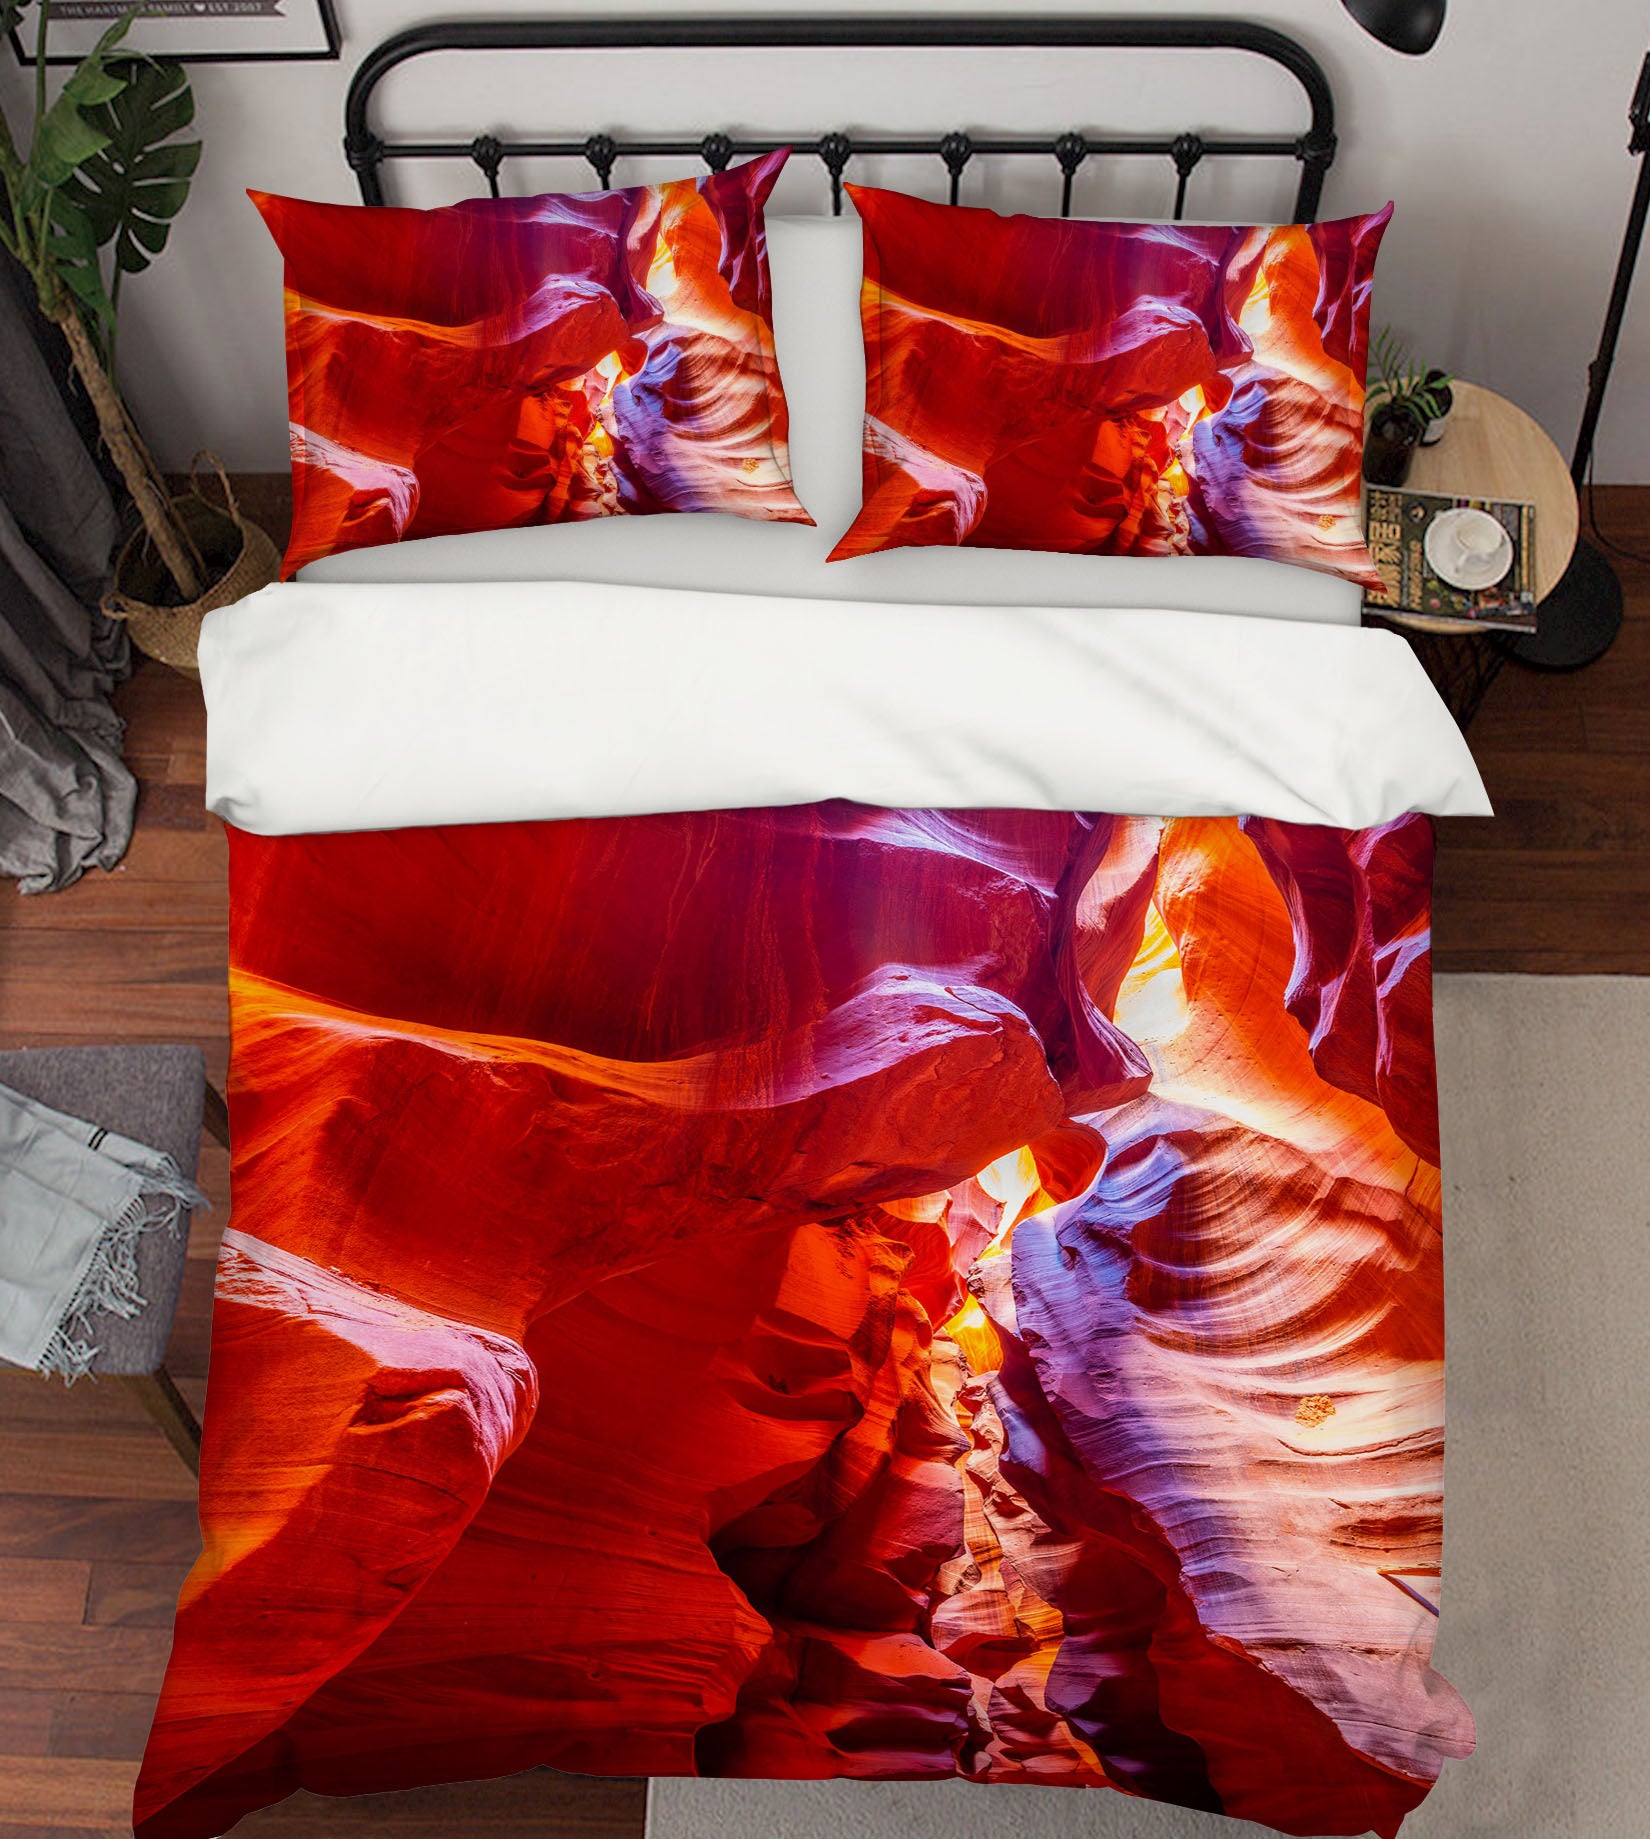 3D Inside Antelope Canyon 037 Marco Carmassi Bedding Bed Pillowcases Quilt